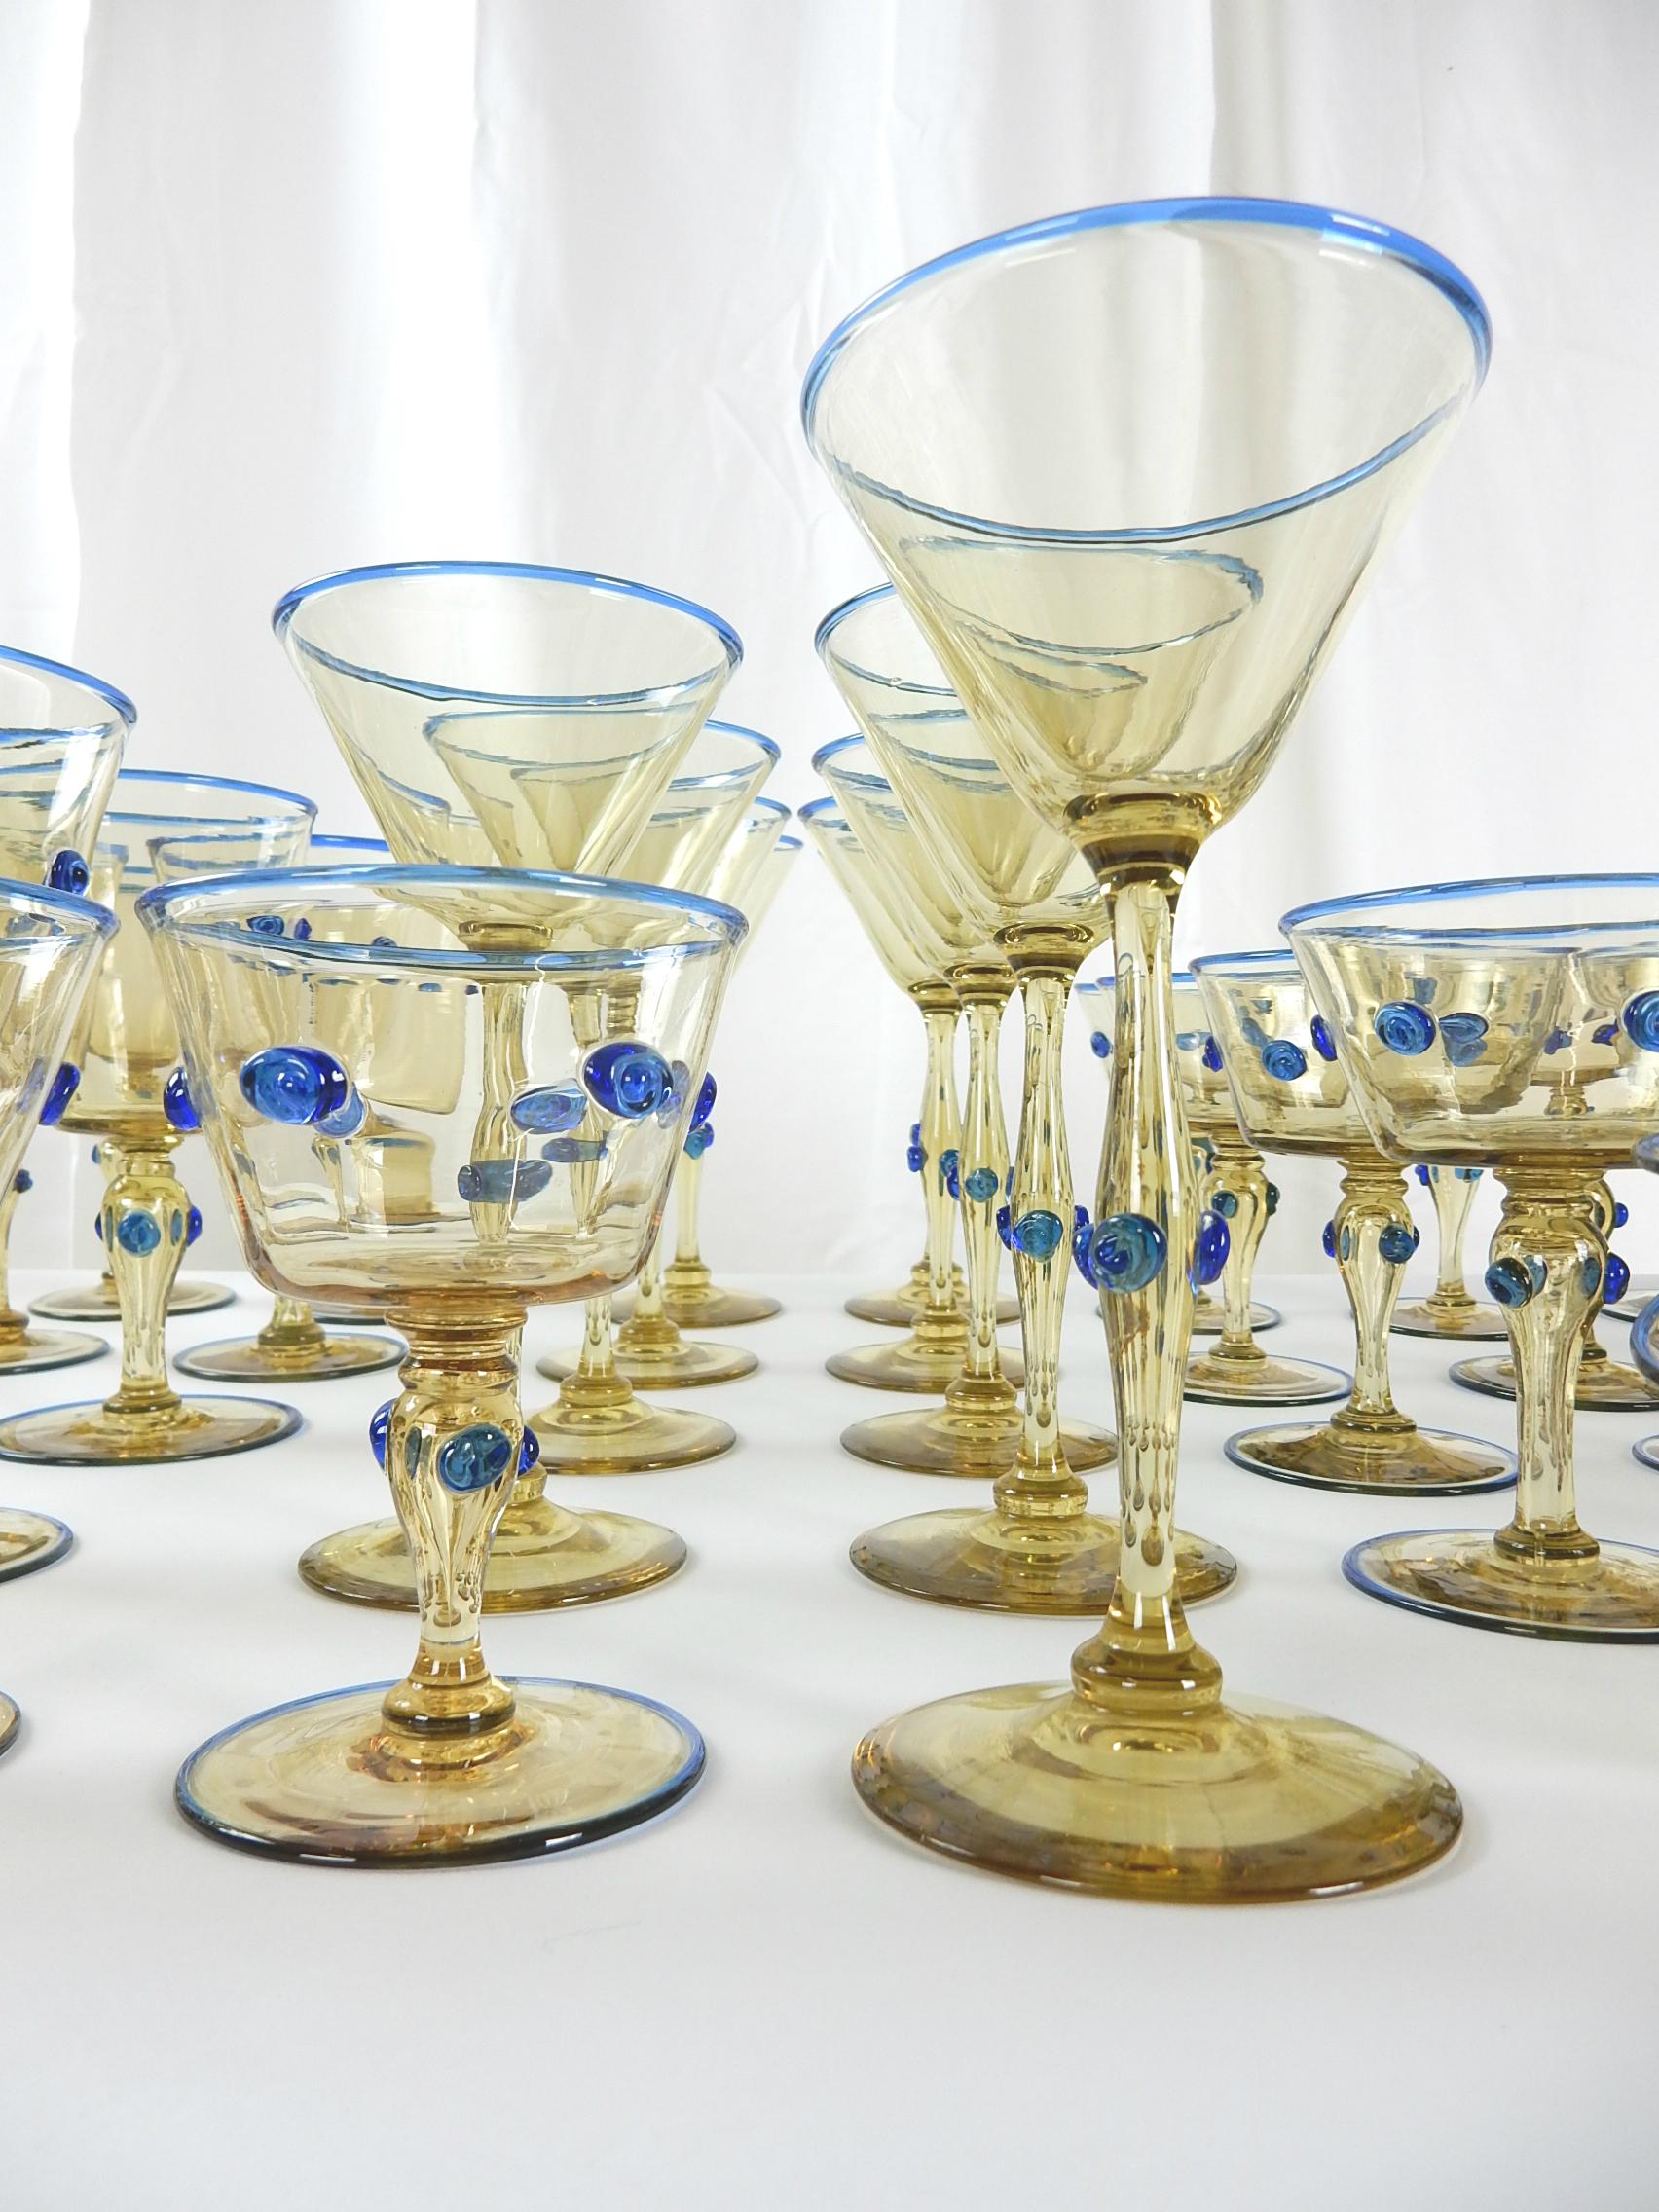 Venice Italy glass service set of gorgeous honey colored glass dotted and trimmed in cobalt blue, circa 1950s.
attributed to Vittorio Zecchin design, consisting of 86 pieces total.
12 ea. tall wine goblets
8 ea. short wine goblets
9 ea.